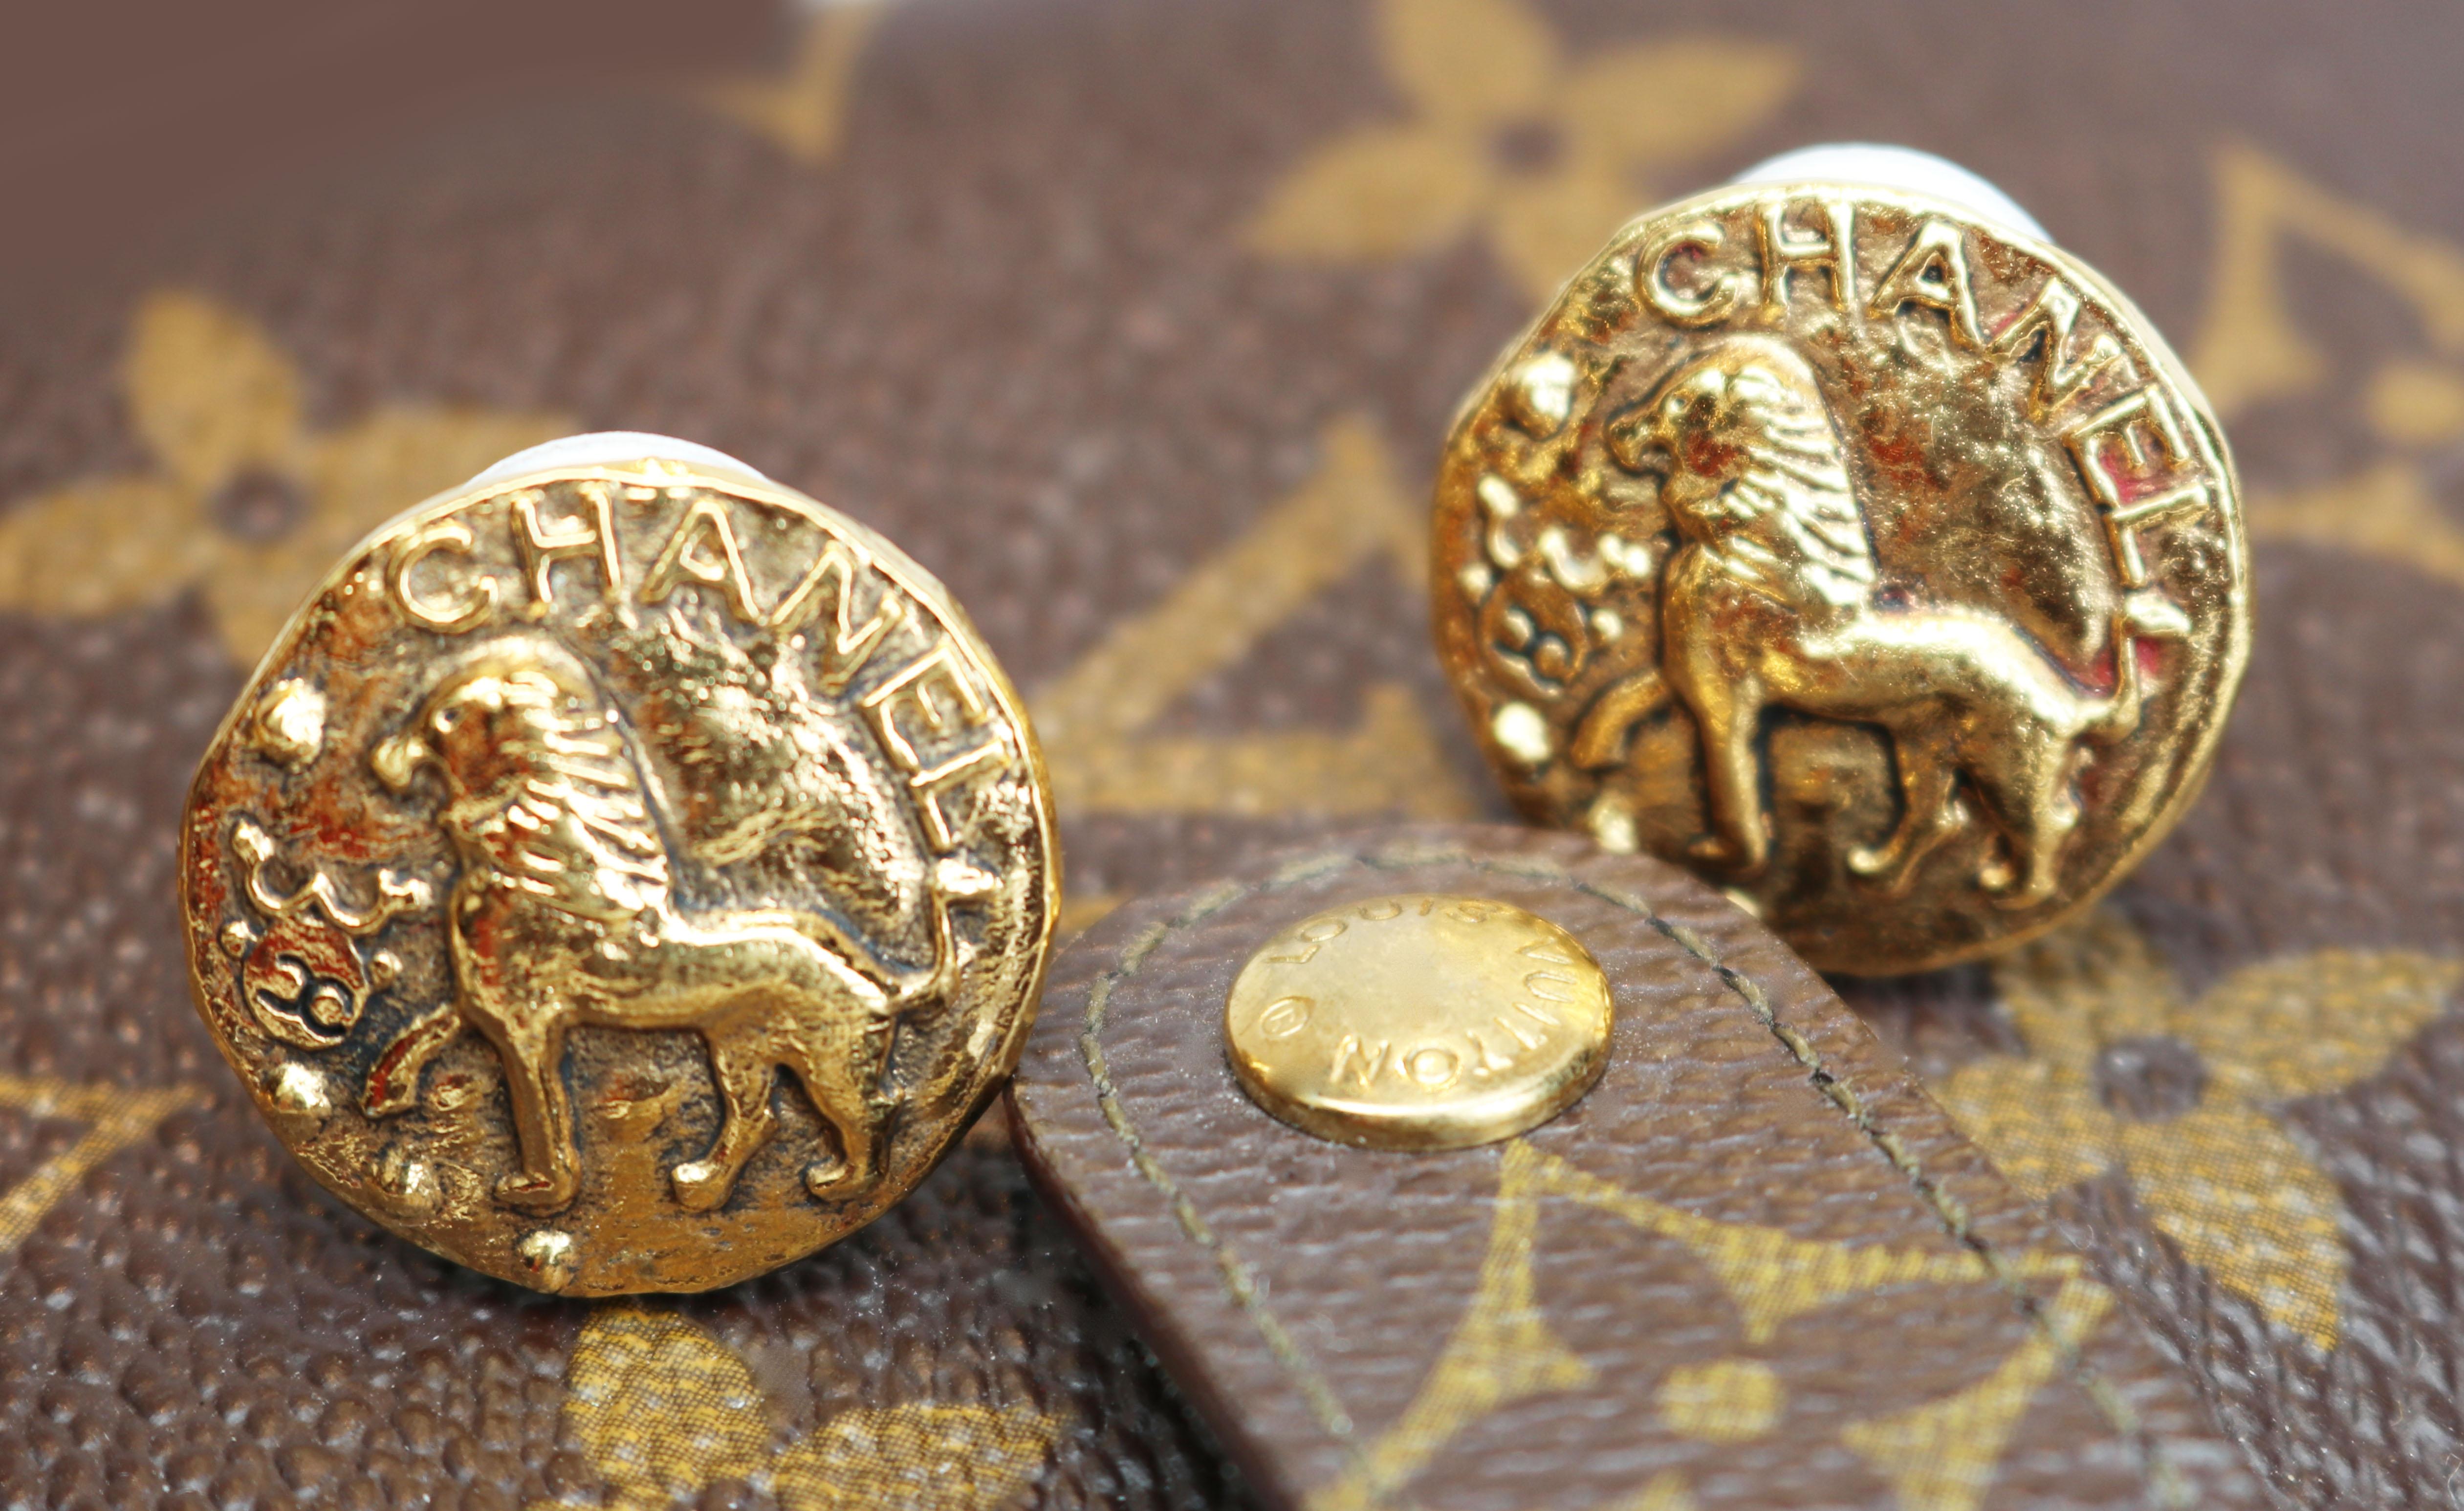 VINTAGE CHANEL EARRINGS *signed* Genuine Gold Chanel Lion Medallion with Logo Clip-on French Designer Statement Earrings
Chanel earrings are indeed special and these are among the most rare. They feature the courageous lion in a regal pose with an